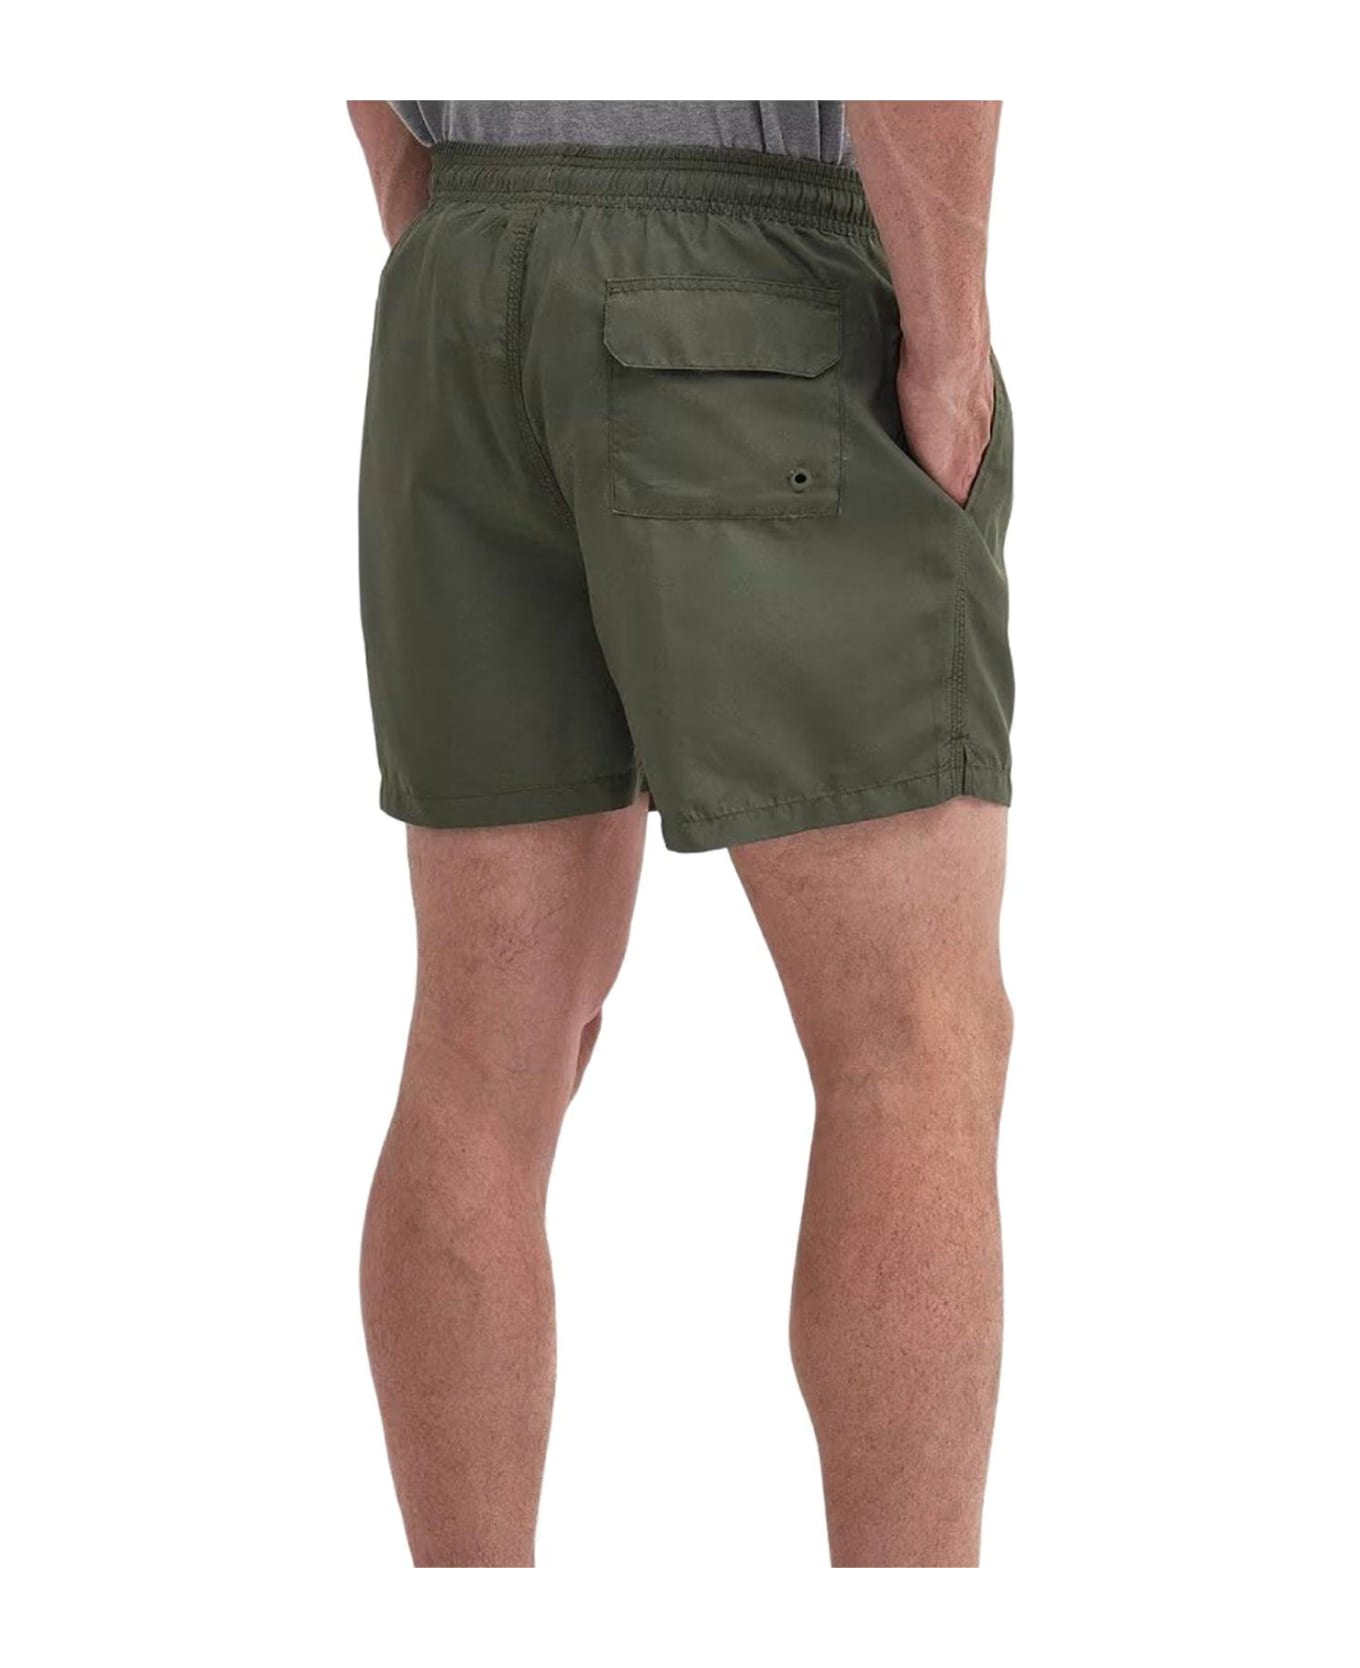 Barbour Drawstring Beach Shorts - Olive